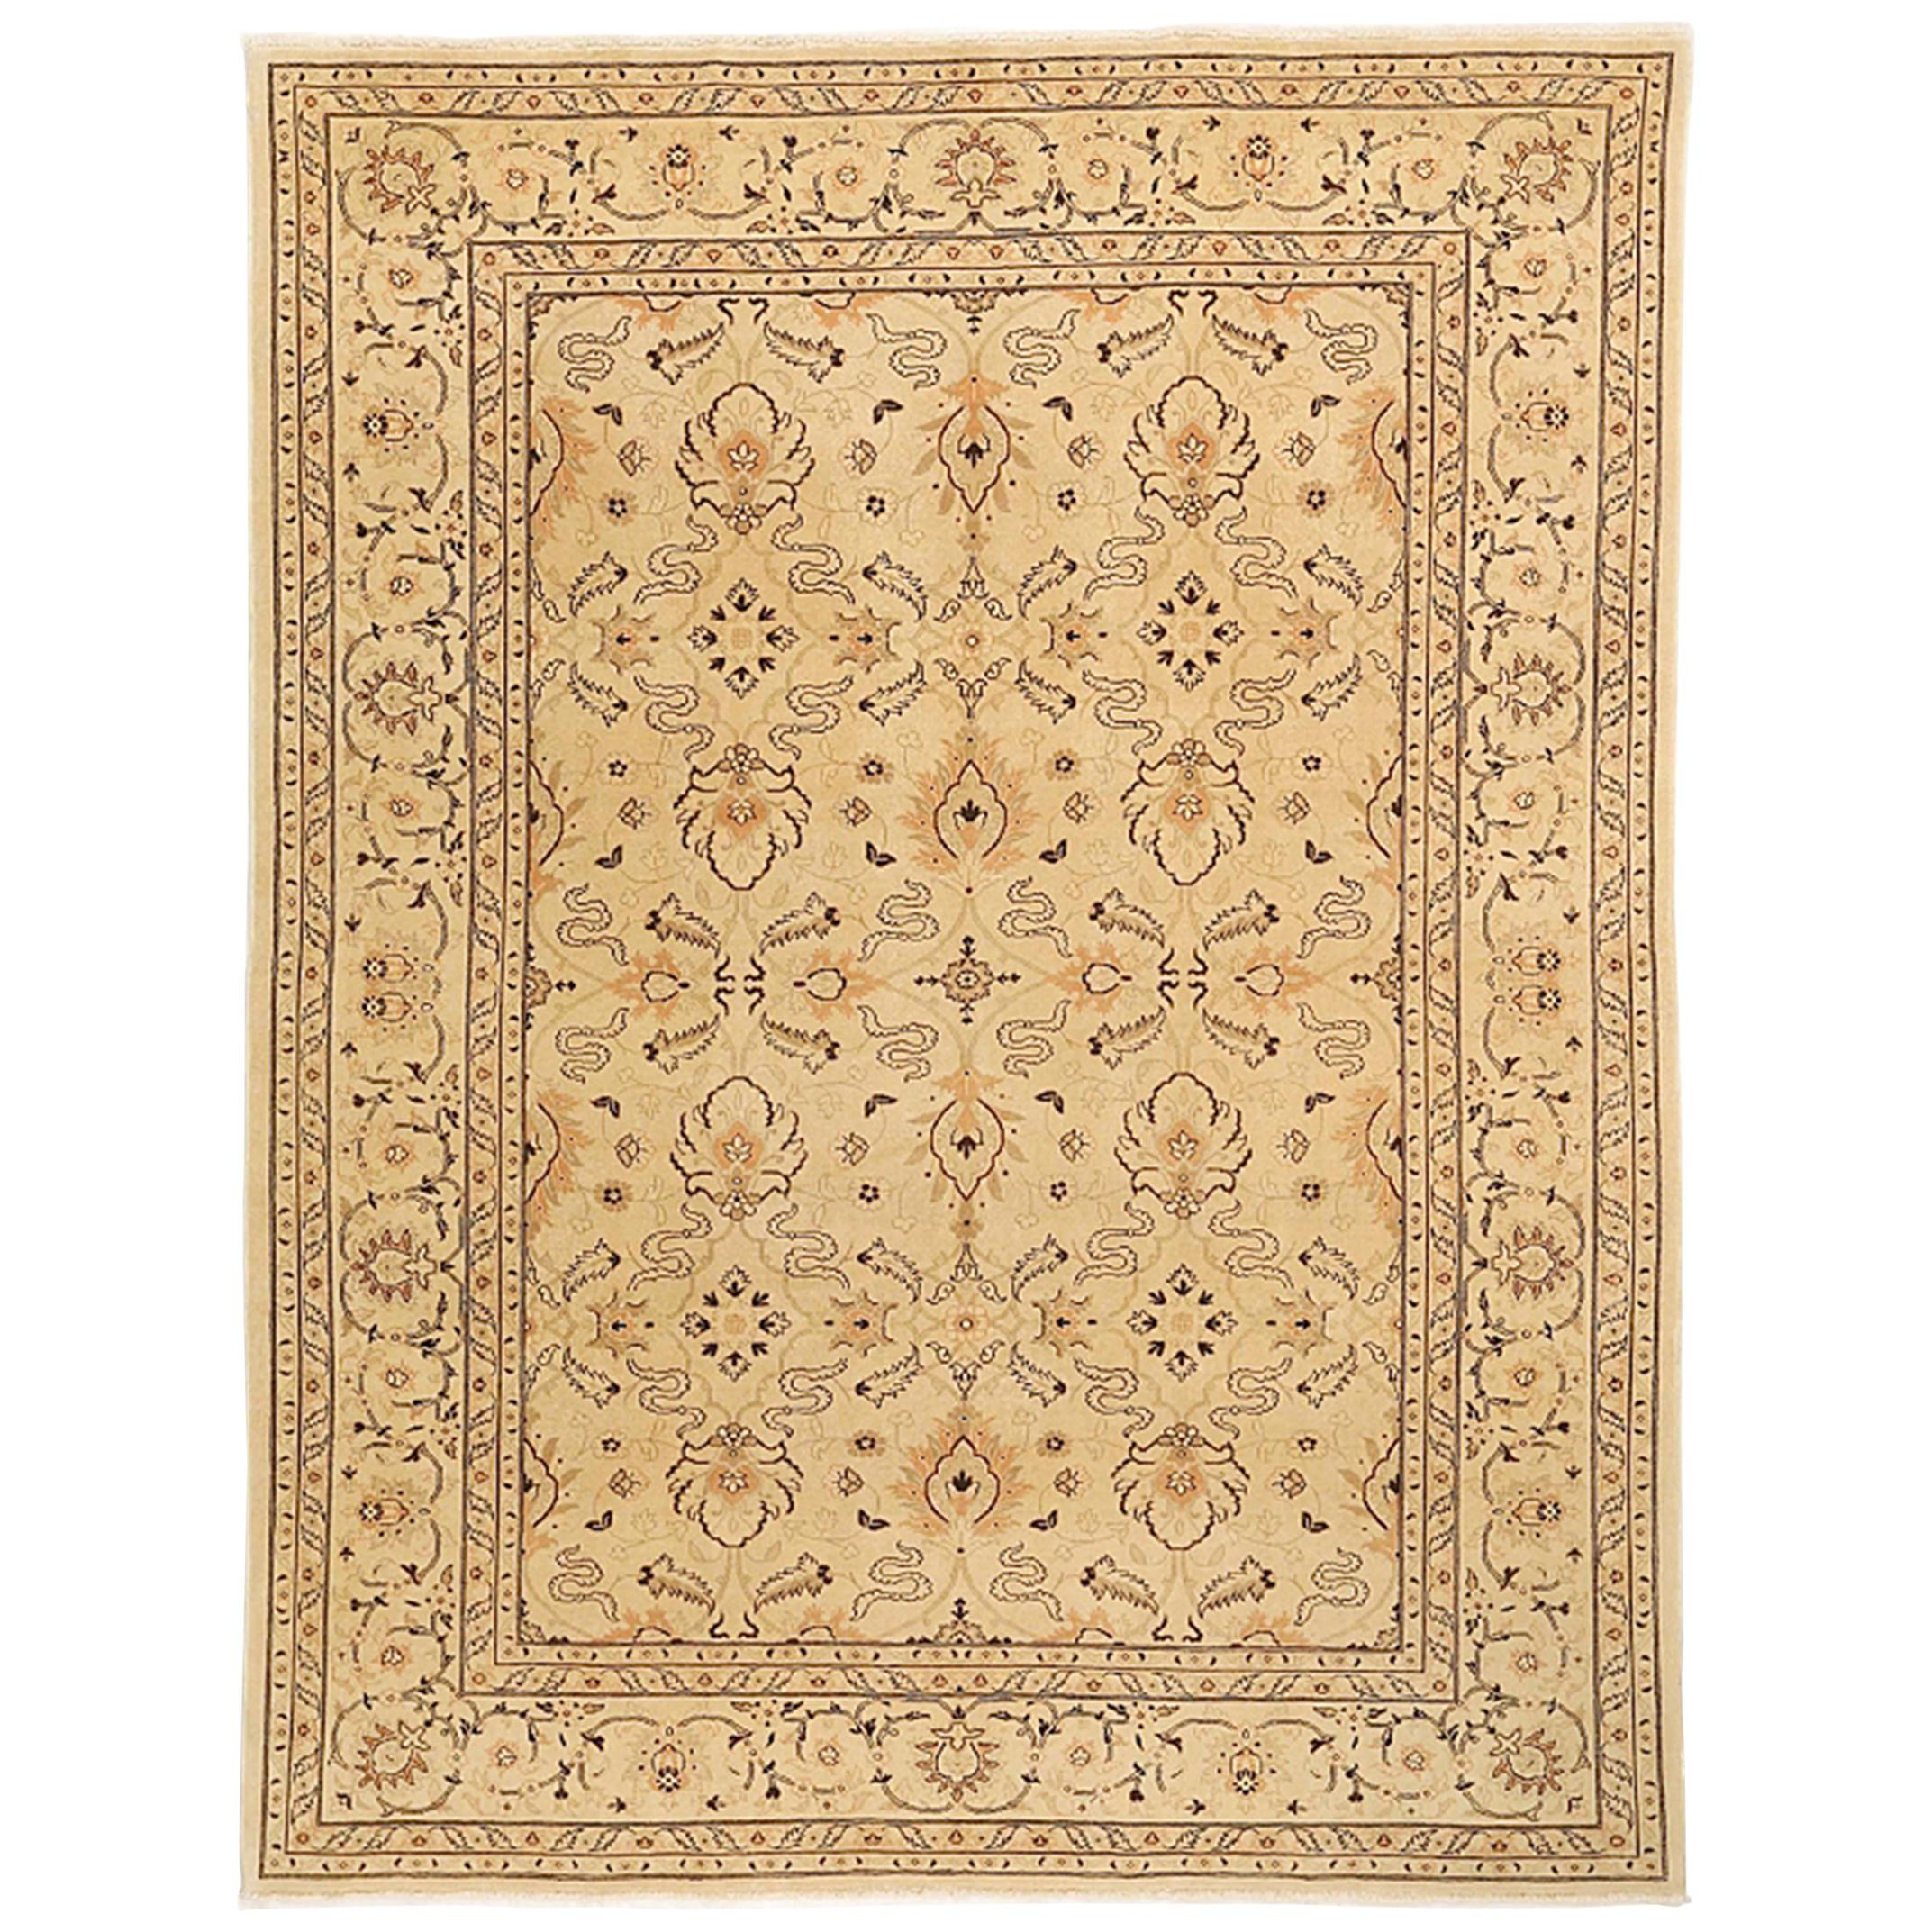 Contemporary Persian Tabriz Rug with Beige & Brown Flower Motifs on Ivory Field For Sale